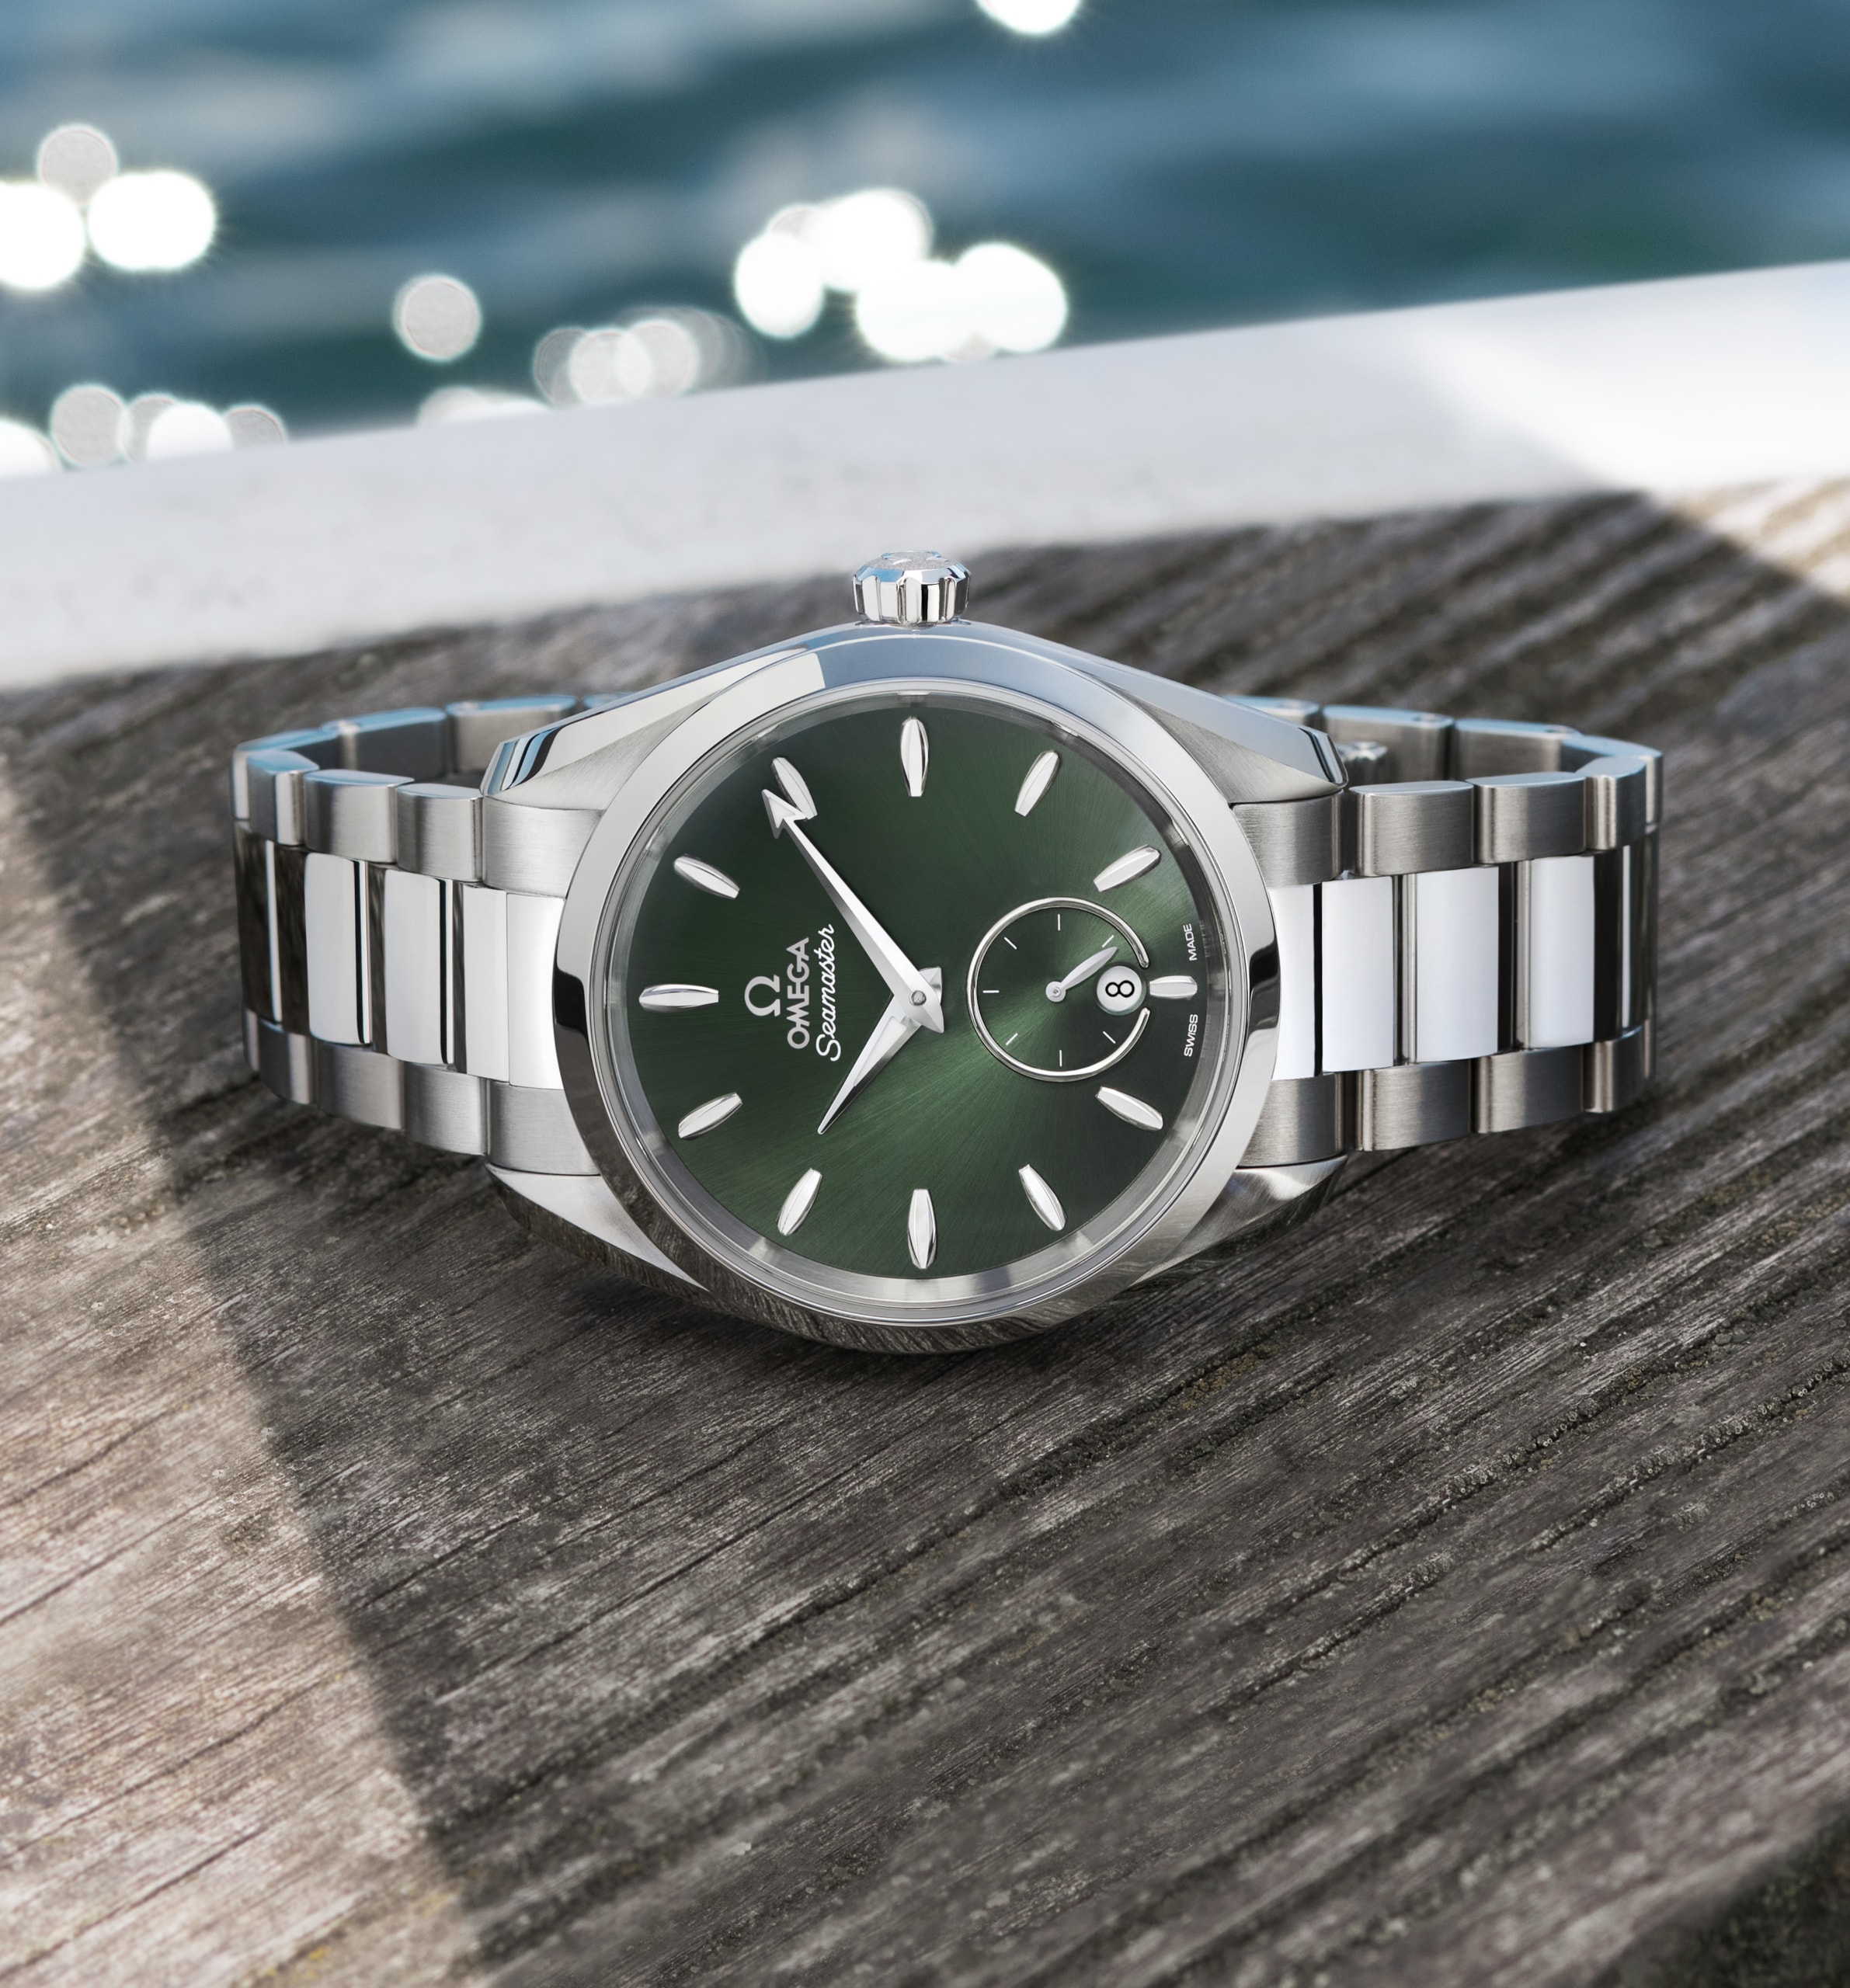 Introducing The Omega Aqua Terra With Small Seconds